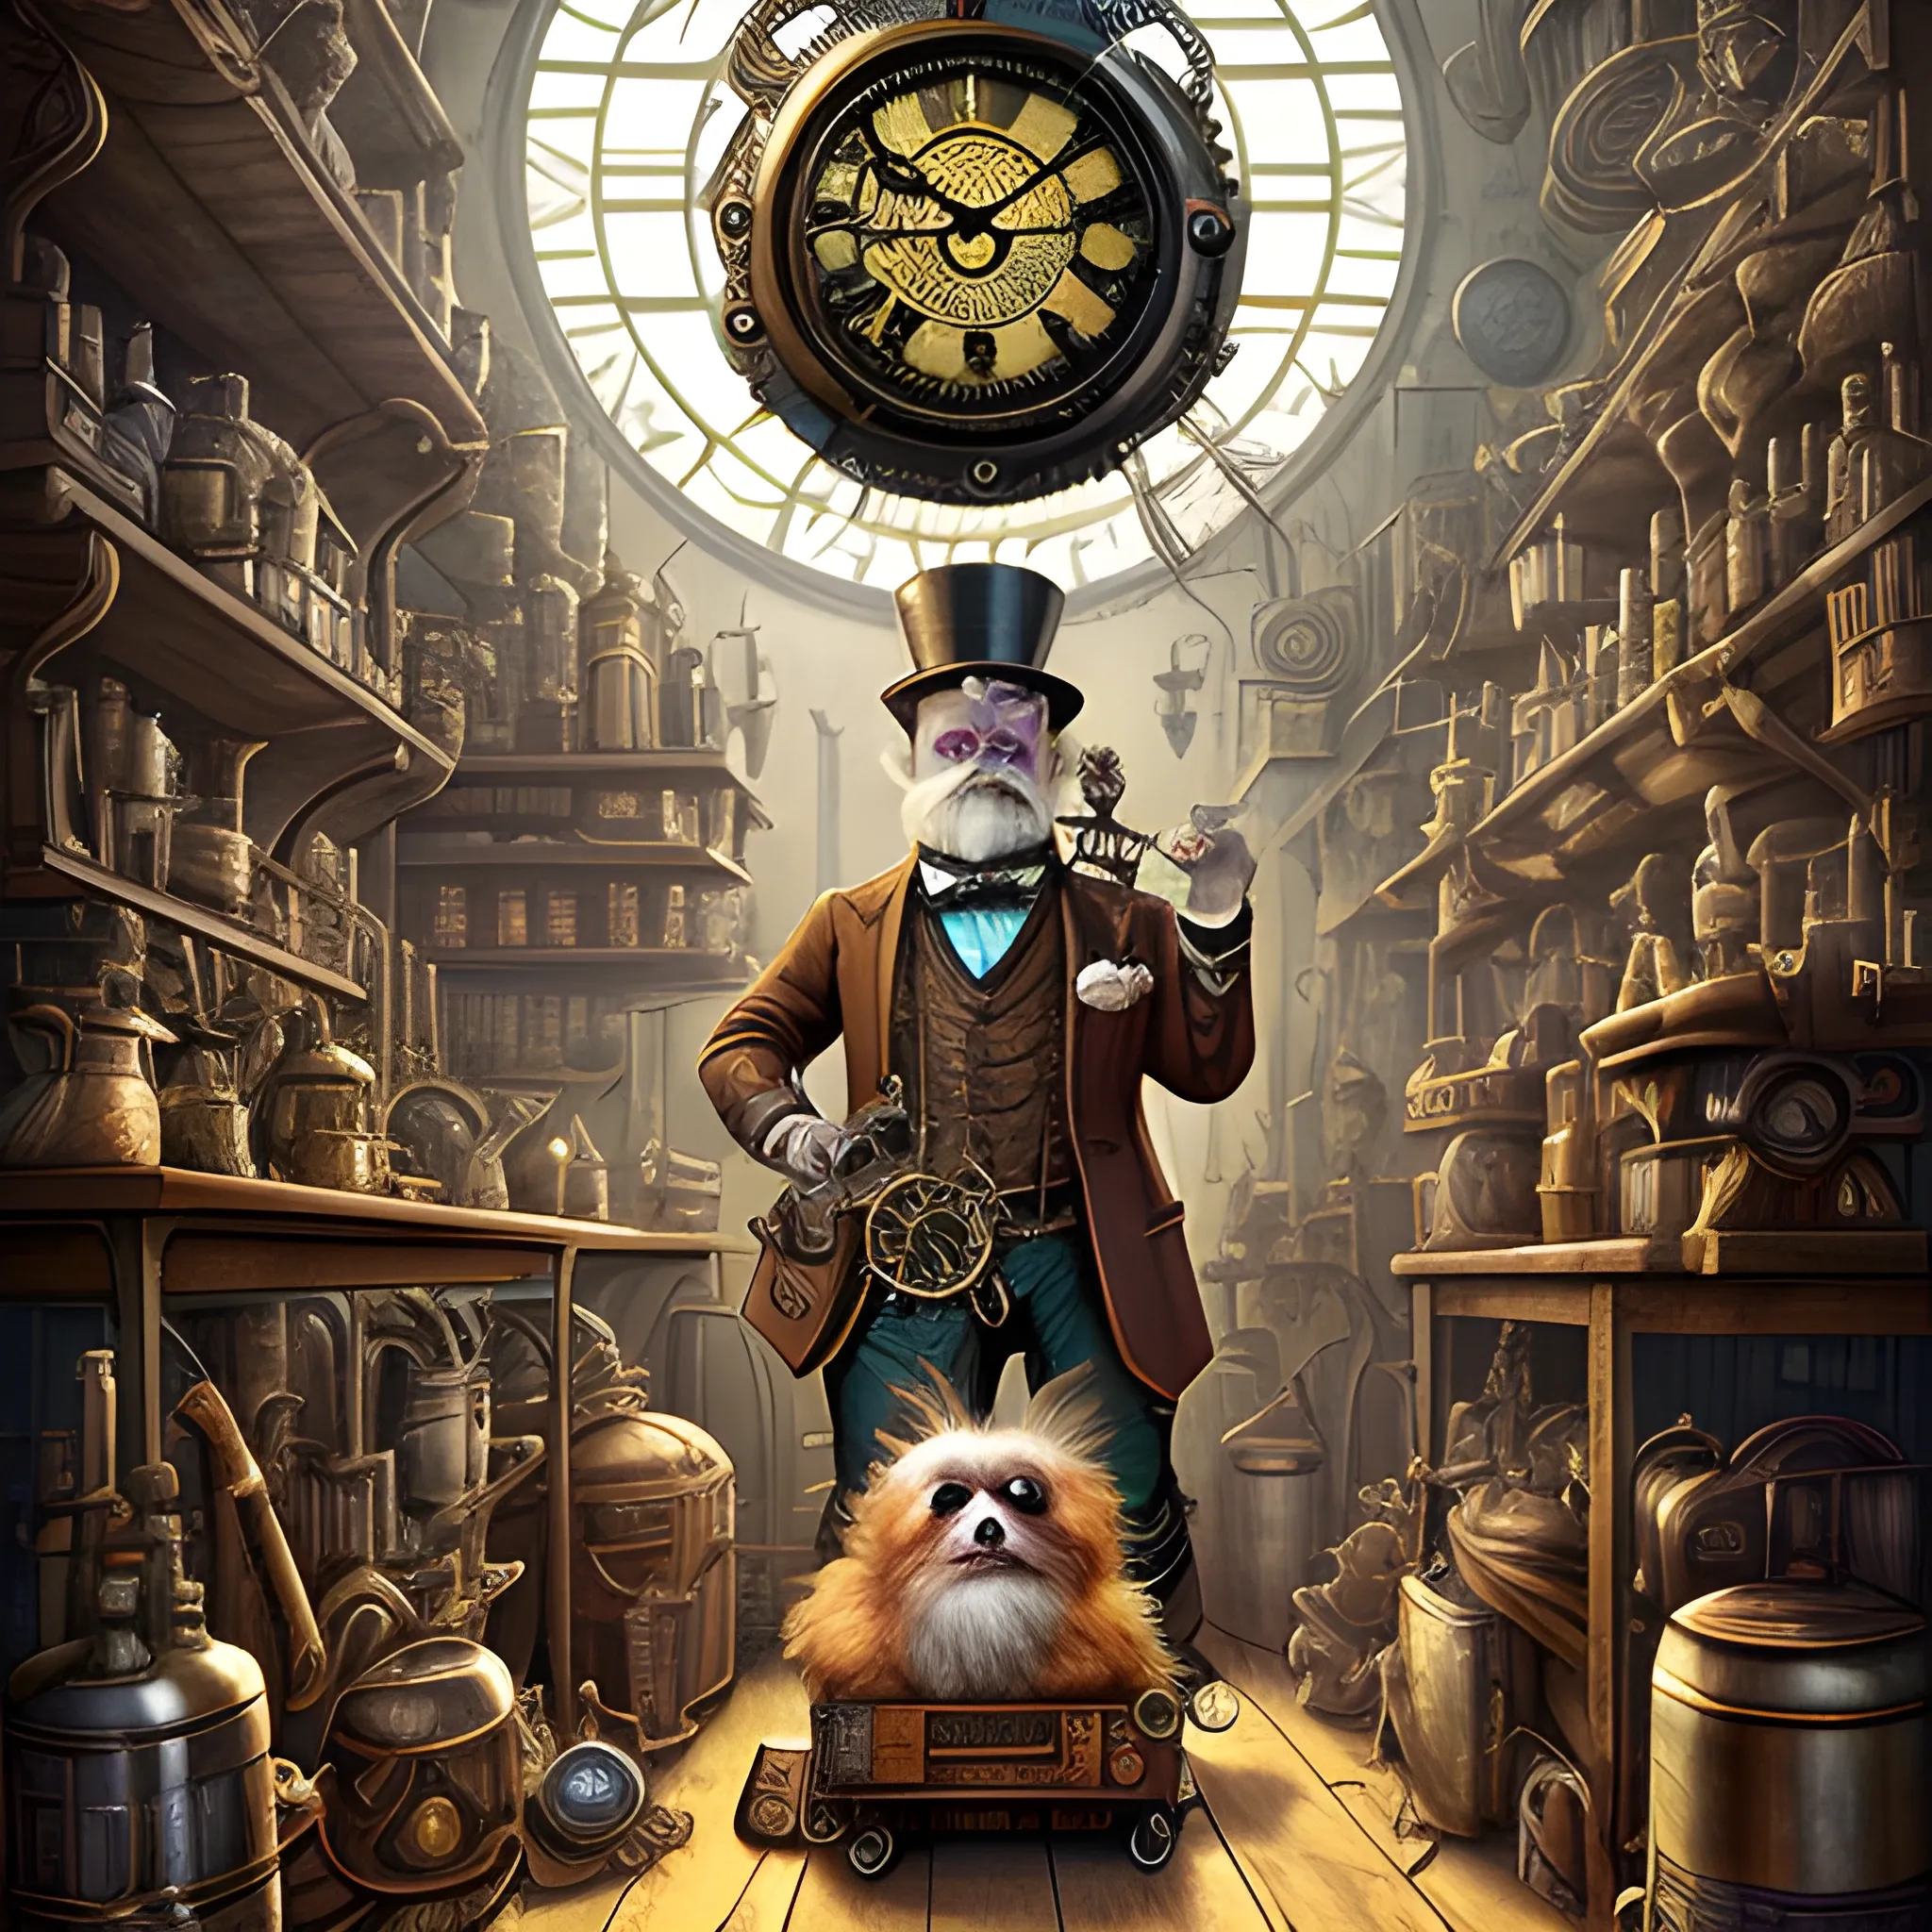 A steampunk-inspired digital illustration of a  dog shitzu inventor in a cluttered workshop, surrounded by intricate machinery and gears. The camera angle is a large shot, capturing the shitzu's enthusiastic expression as he tinkers with a fantastical contraption. The lighting is warm and atmospheric, with rays of sunlight streaming through stained glass windows, casting vibrant colors and ((shadows)) across the room. The style combines elements of steampunk and clock-punk, resembling the works of Jules Verne and H.R. Giger. The image is detailed and intricate, showcasing the gnome's ingenious inventions and the mesmerizing complexity of the steampunk world